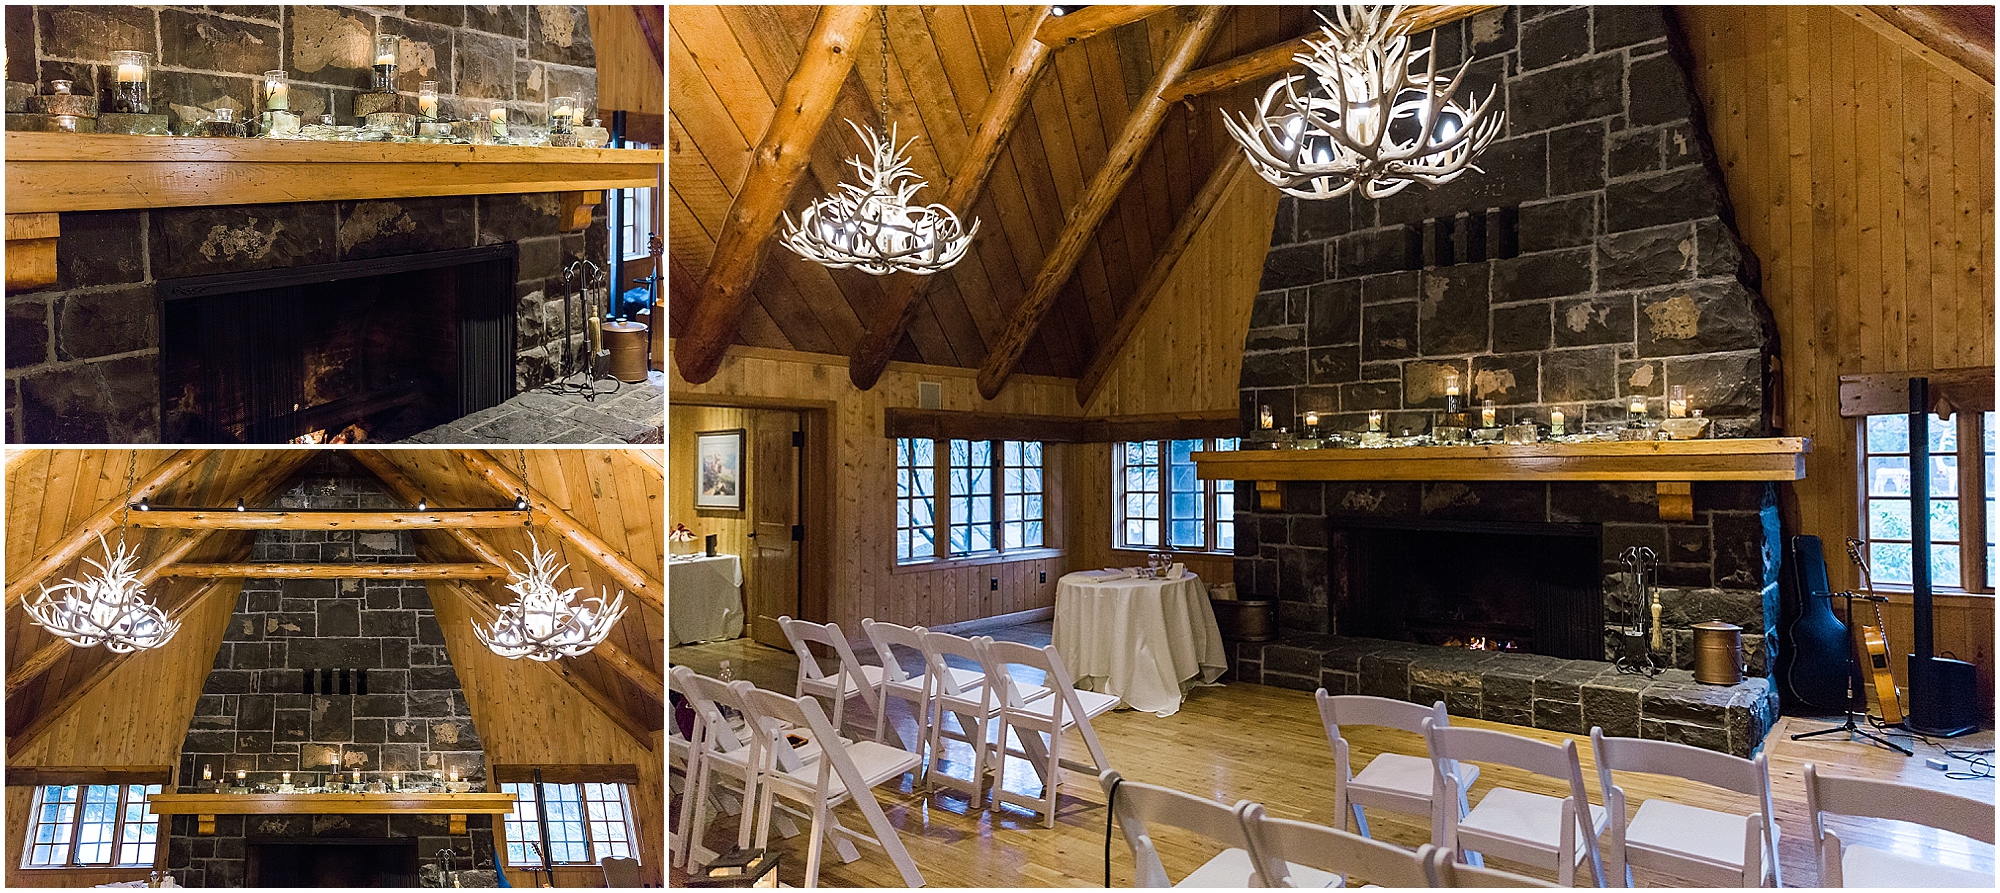 The gorgeous wood floors and paneled walls, with a large stone fireplace and antler chandeliers is the perfect spot for an intimate Sunriver Resort Winter Wedding near Bend, OR. | Erica Swantek Photography 